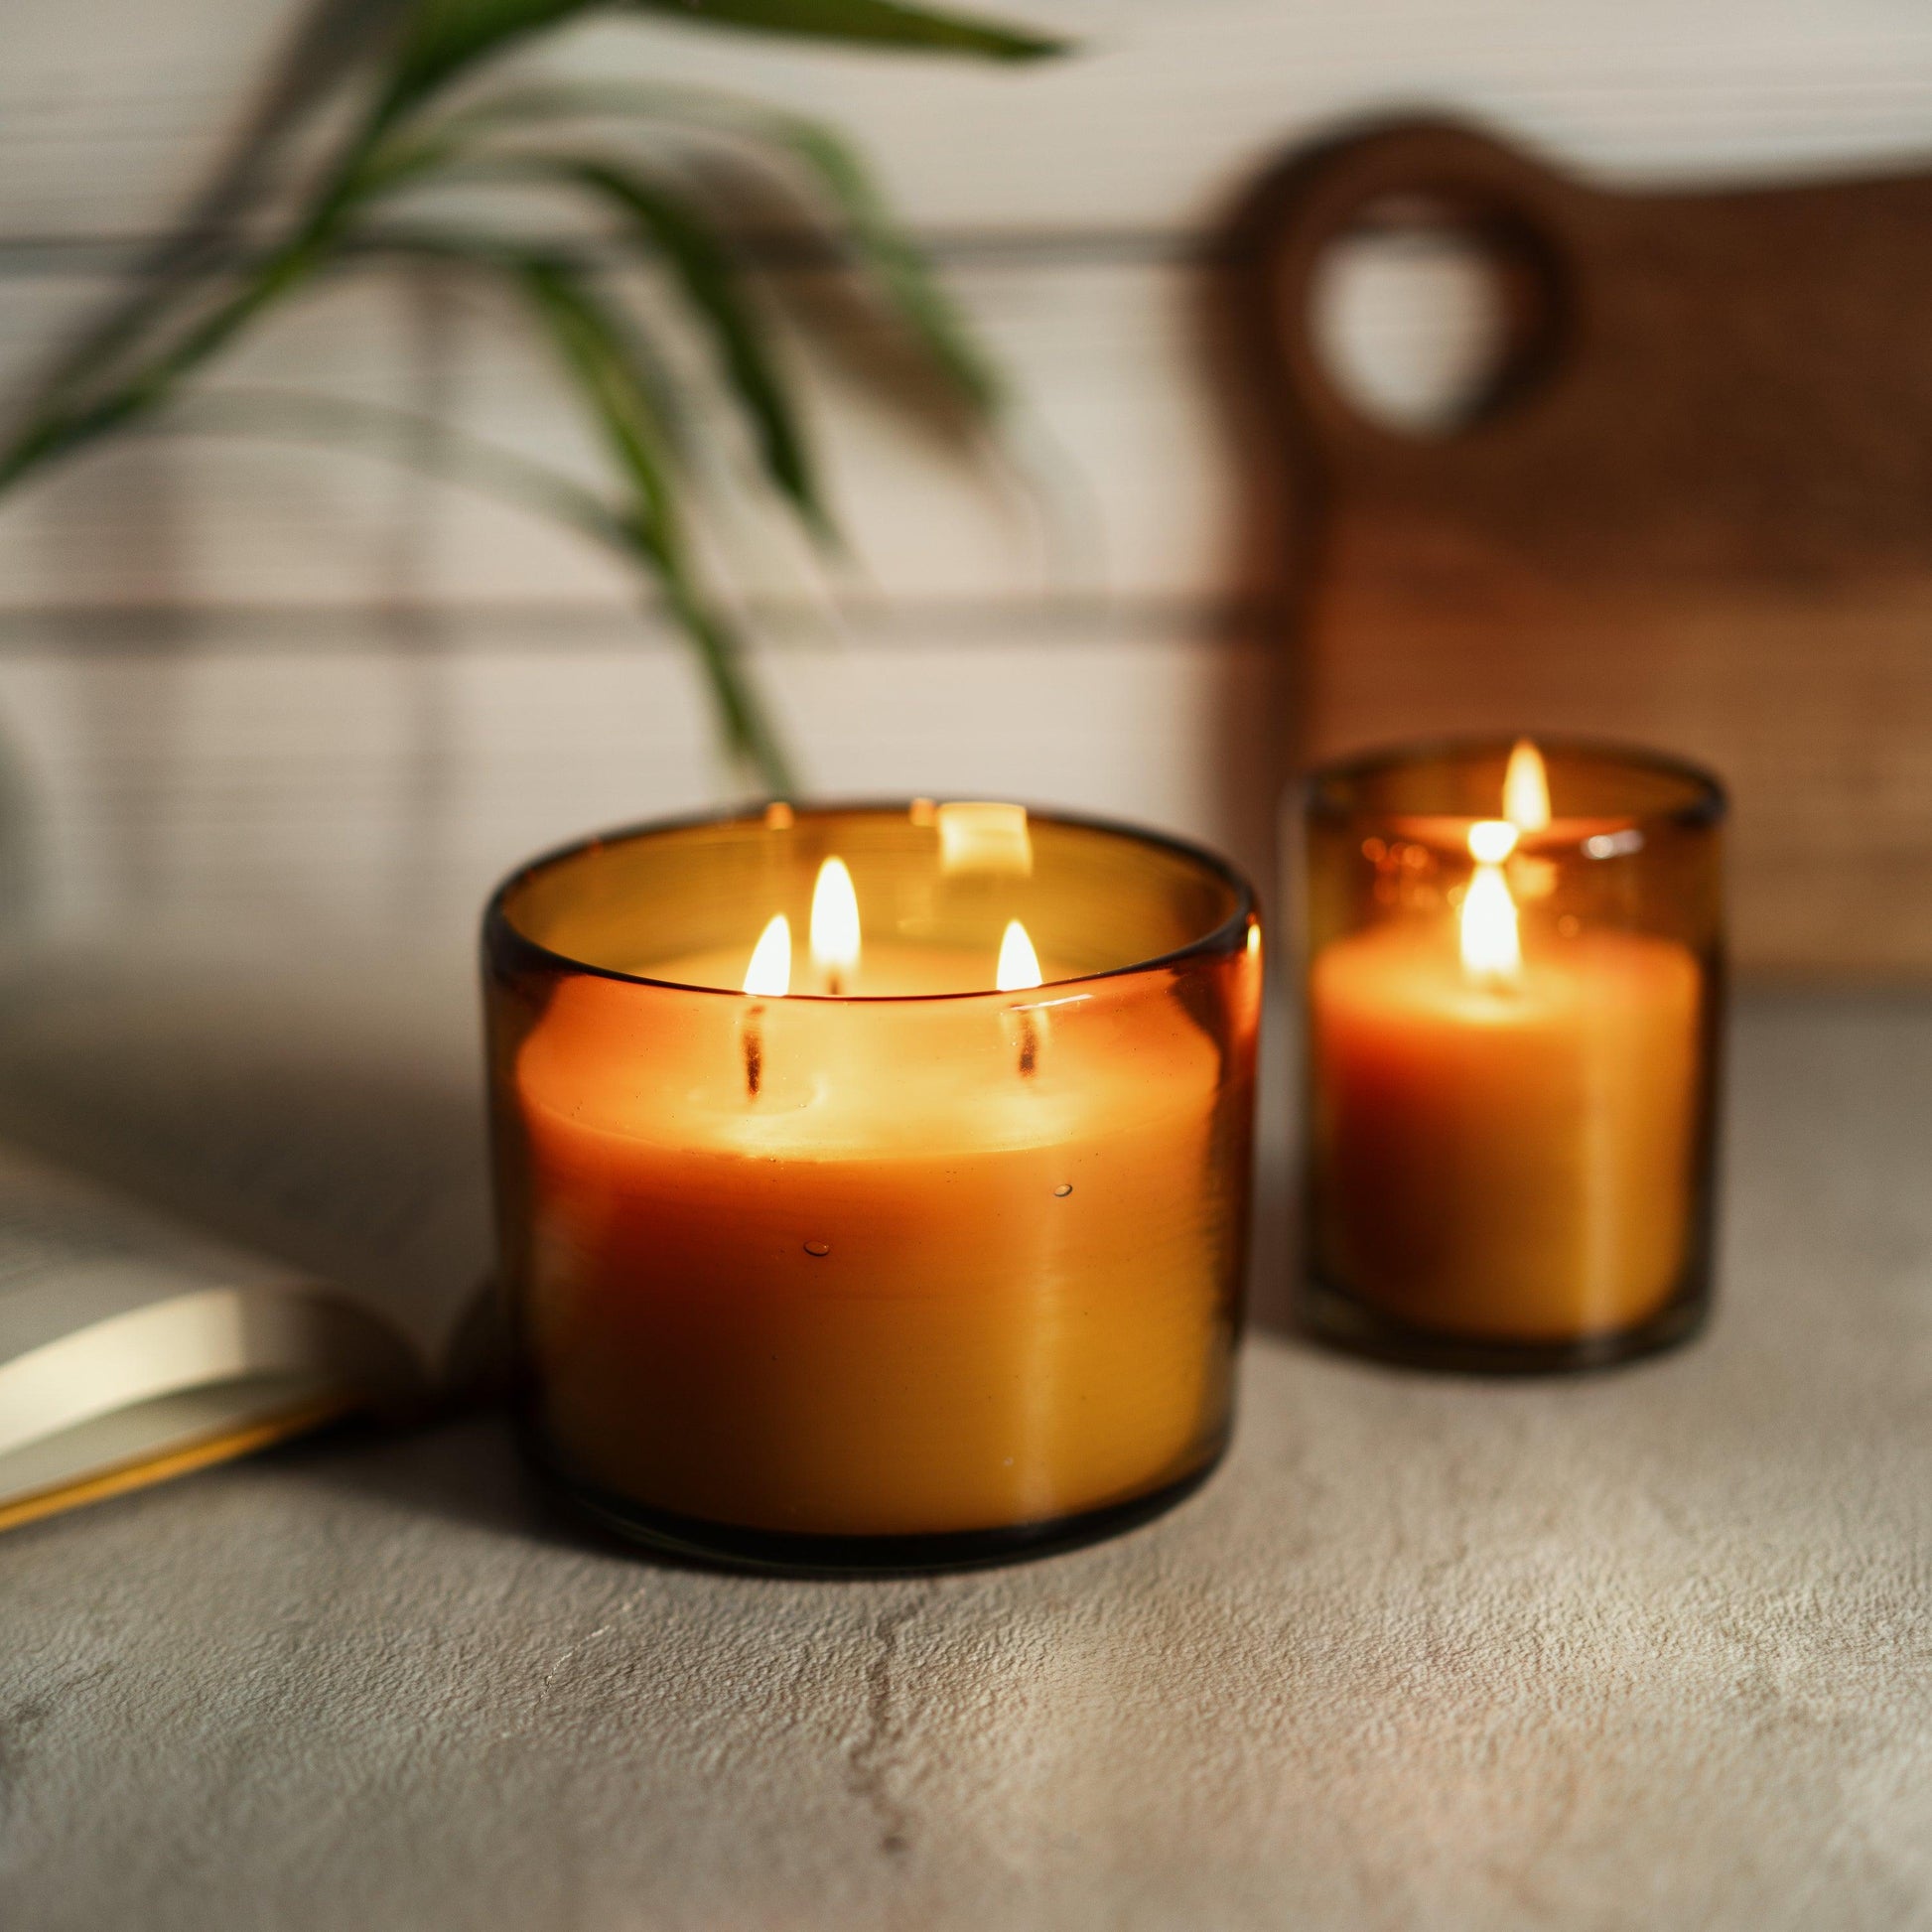 Beeswax Mini Votive Candles - 100% Pure Beeswax